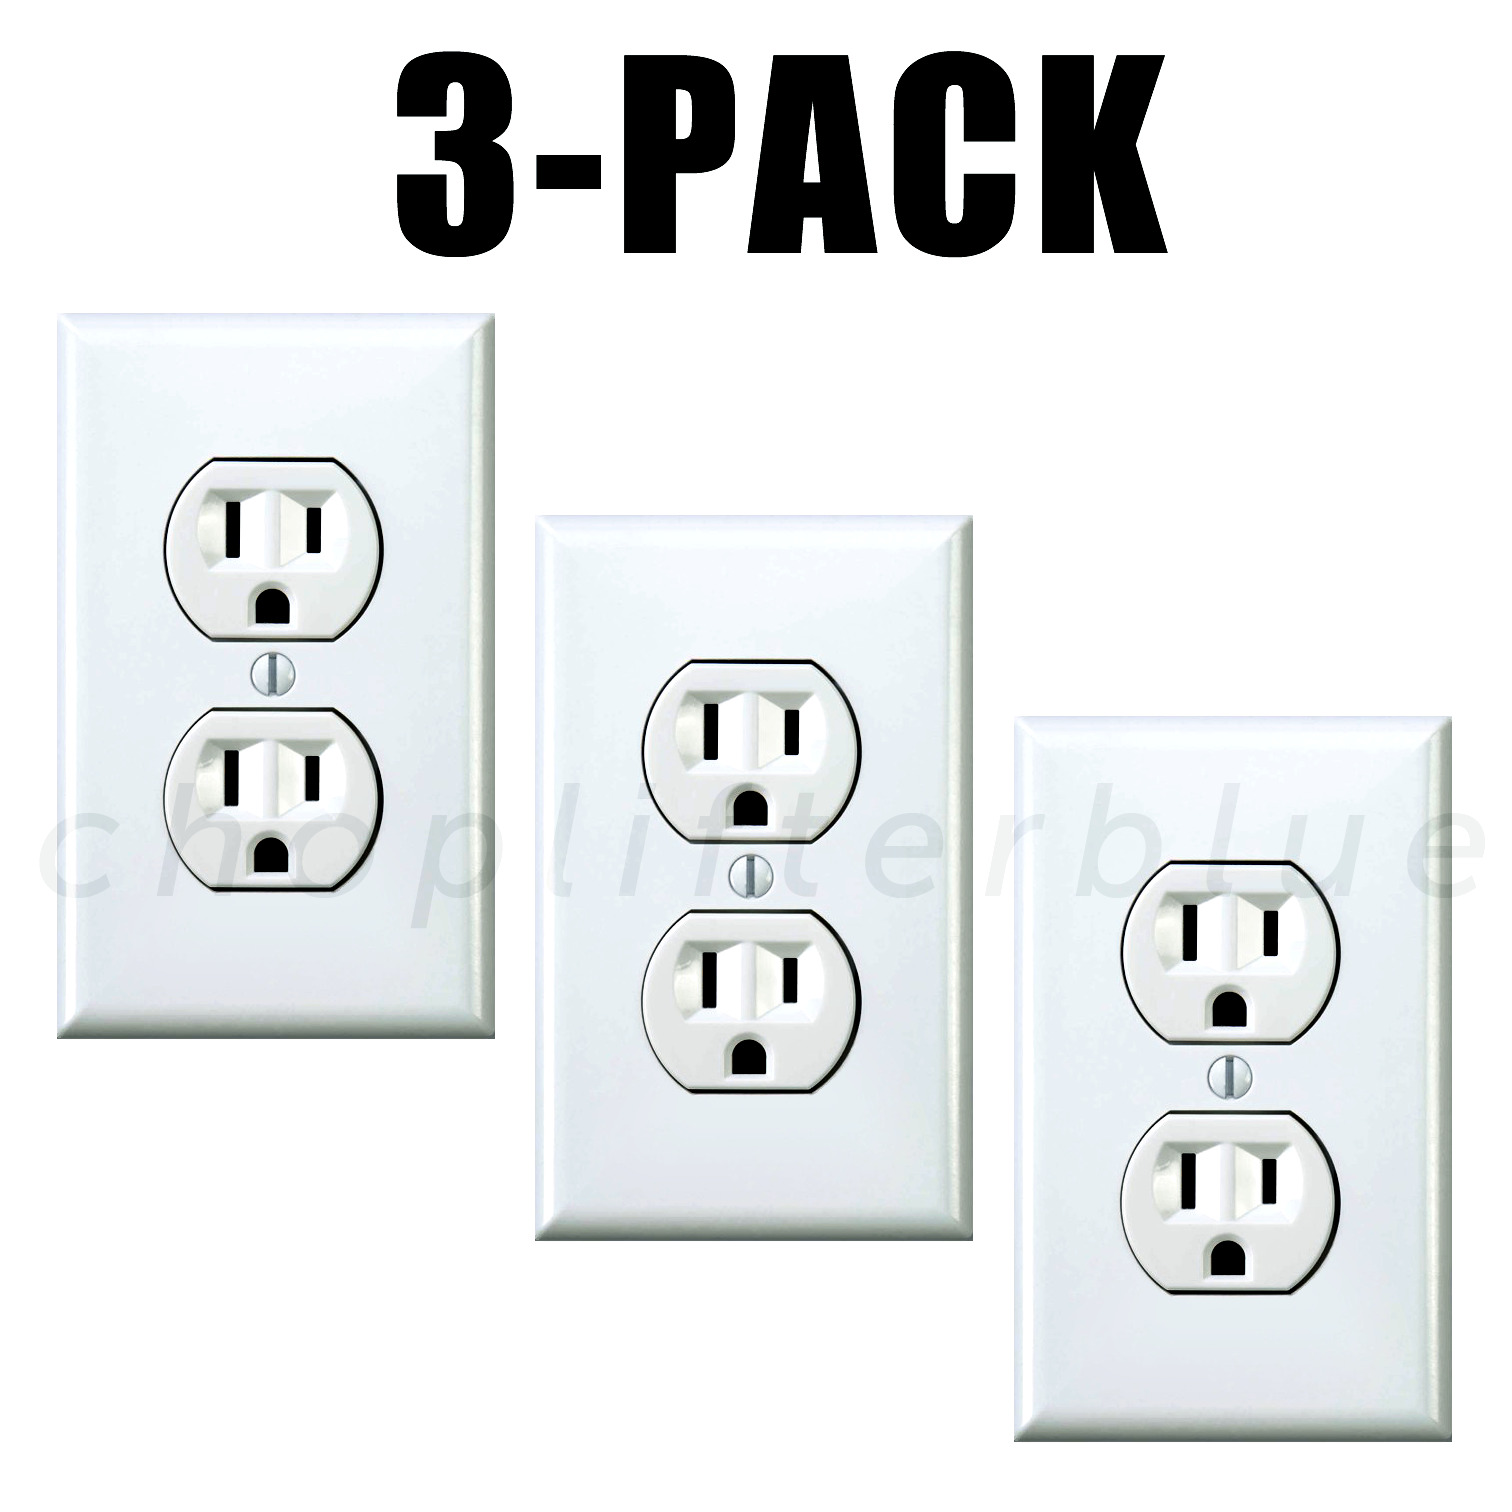 Electrical Outlet Stickers 3-Pack Prank Fake Joke Funny Custom Decal HQ Sticker